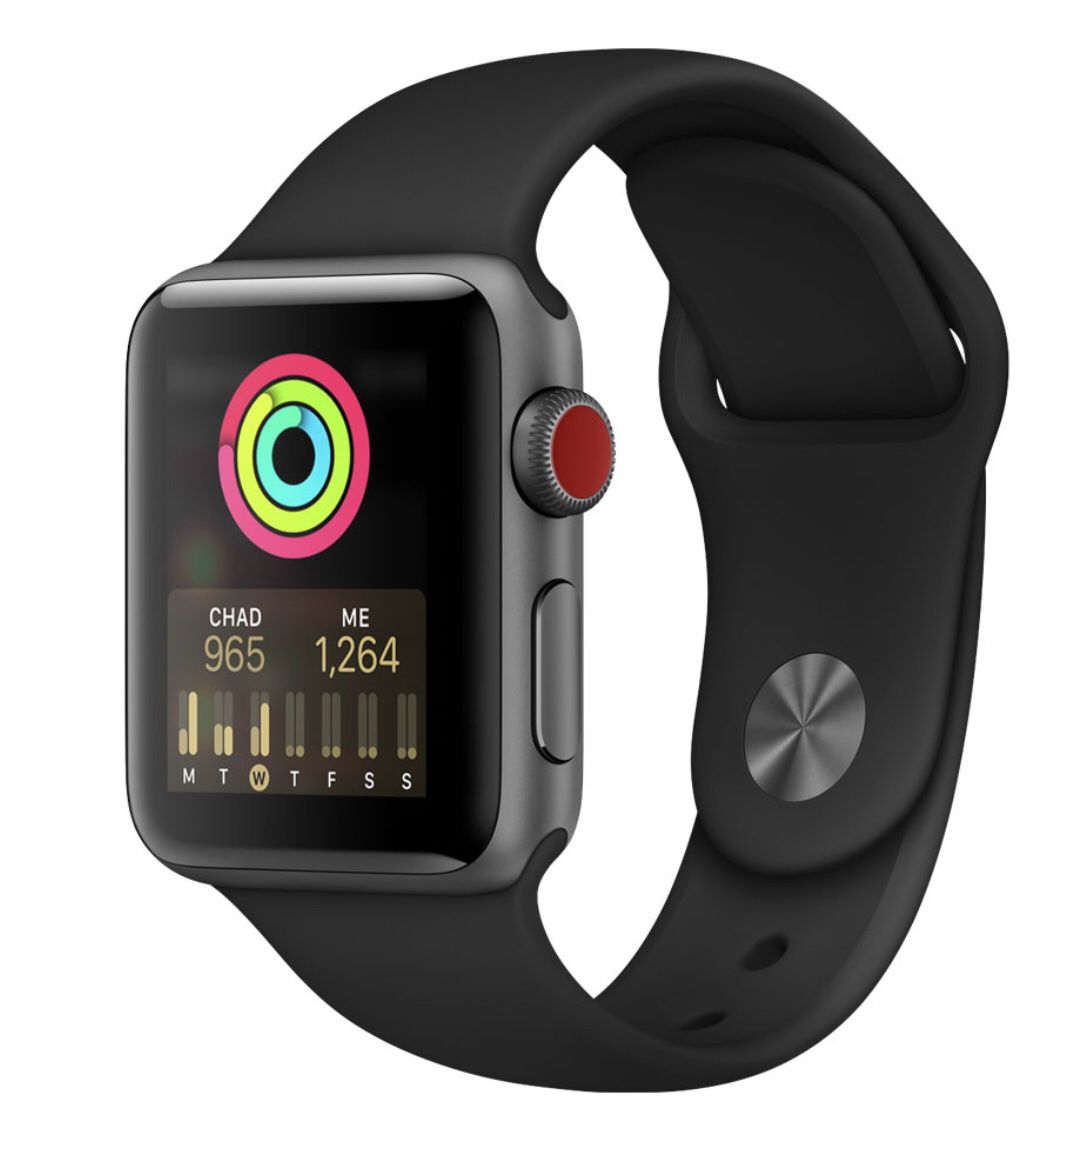 Apple Watch Series 3 LTE (GPS + Cellular) Space Gray with Red band